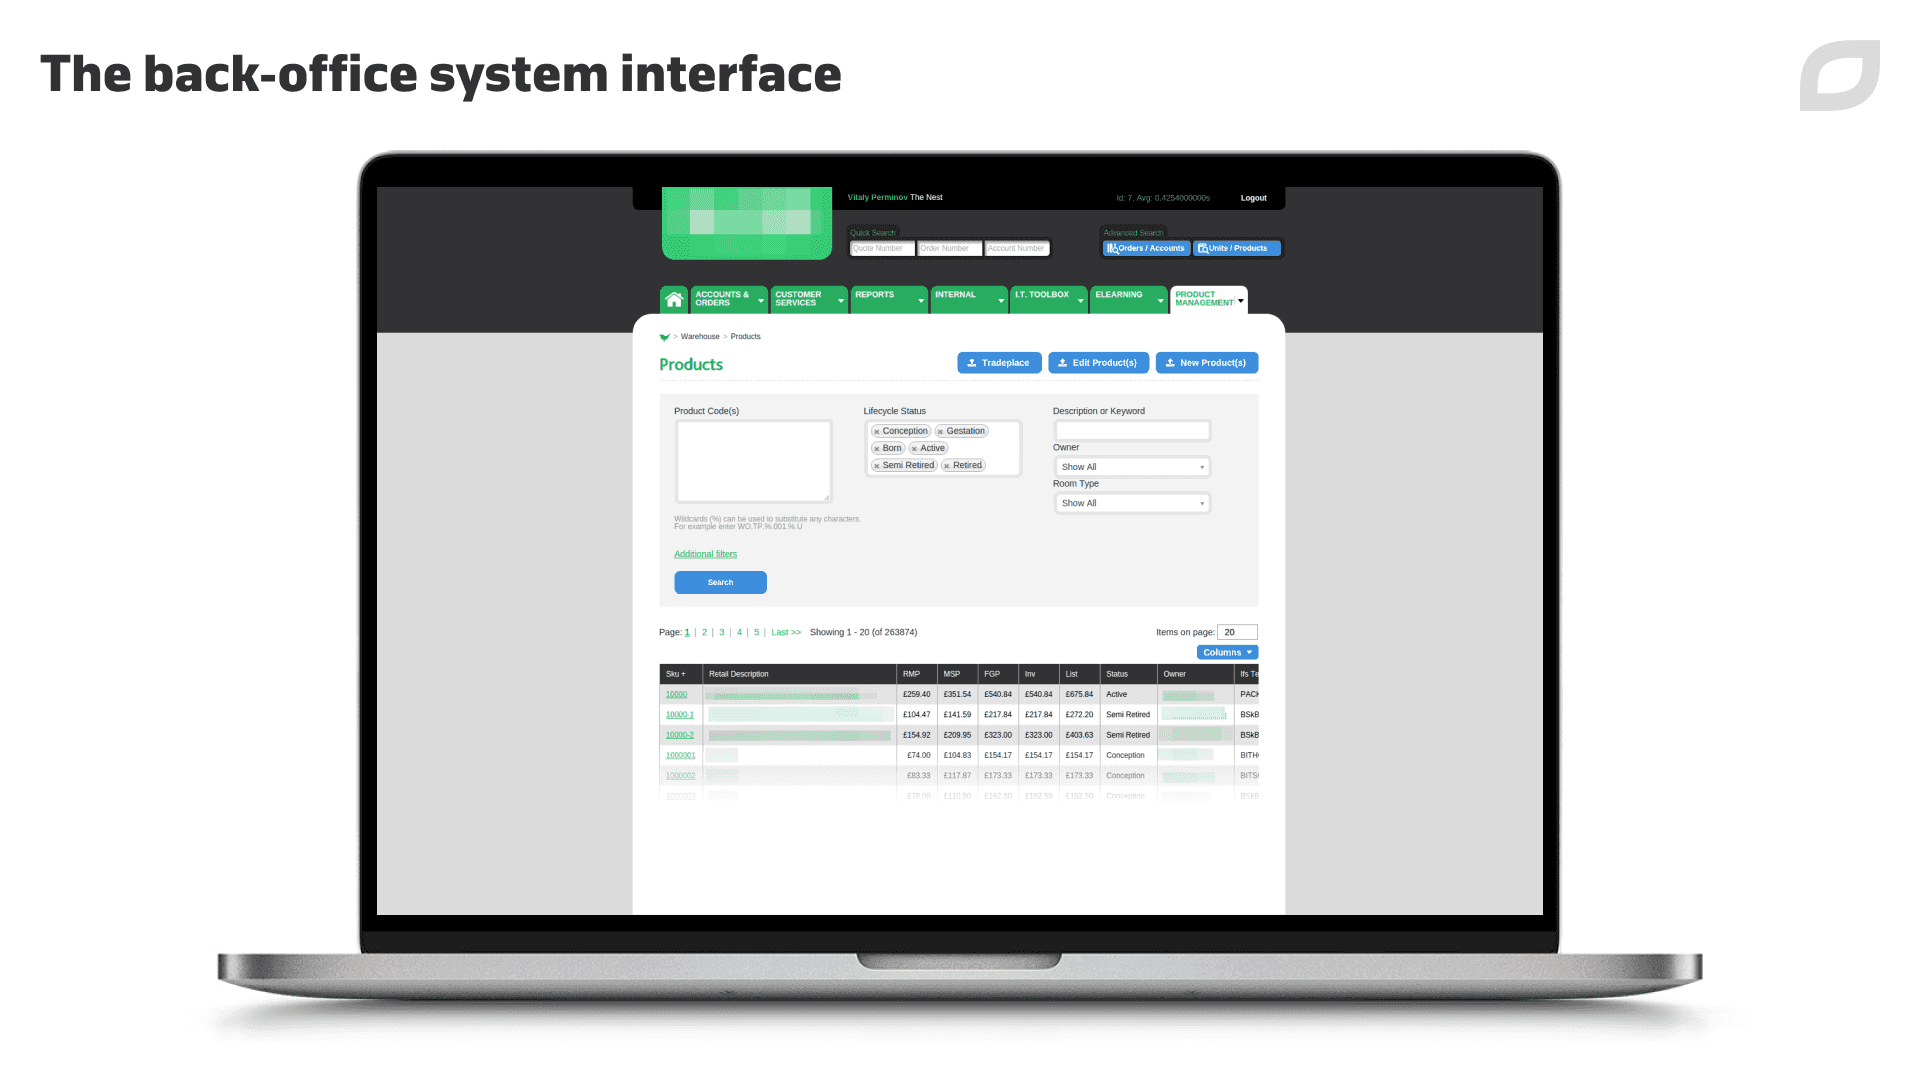 The back office system interface